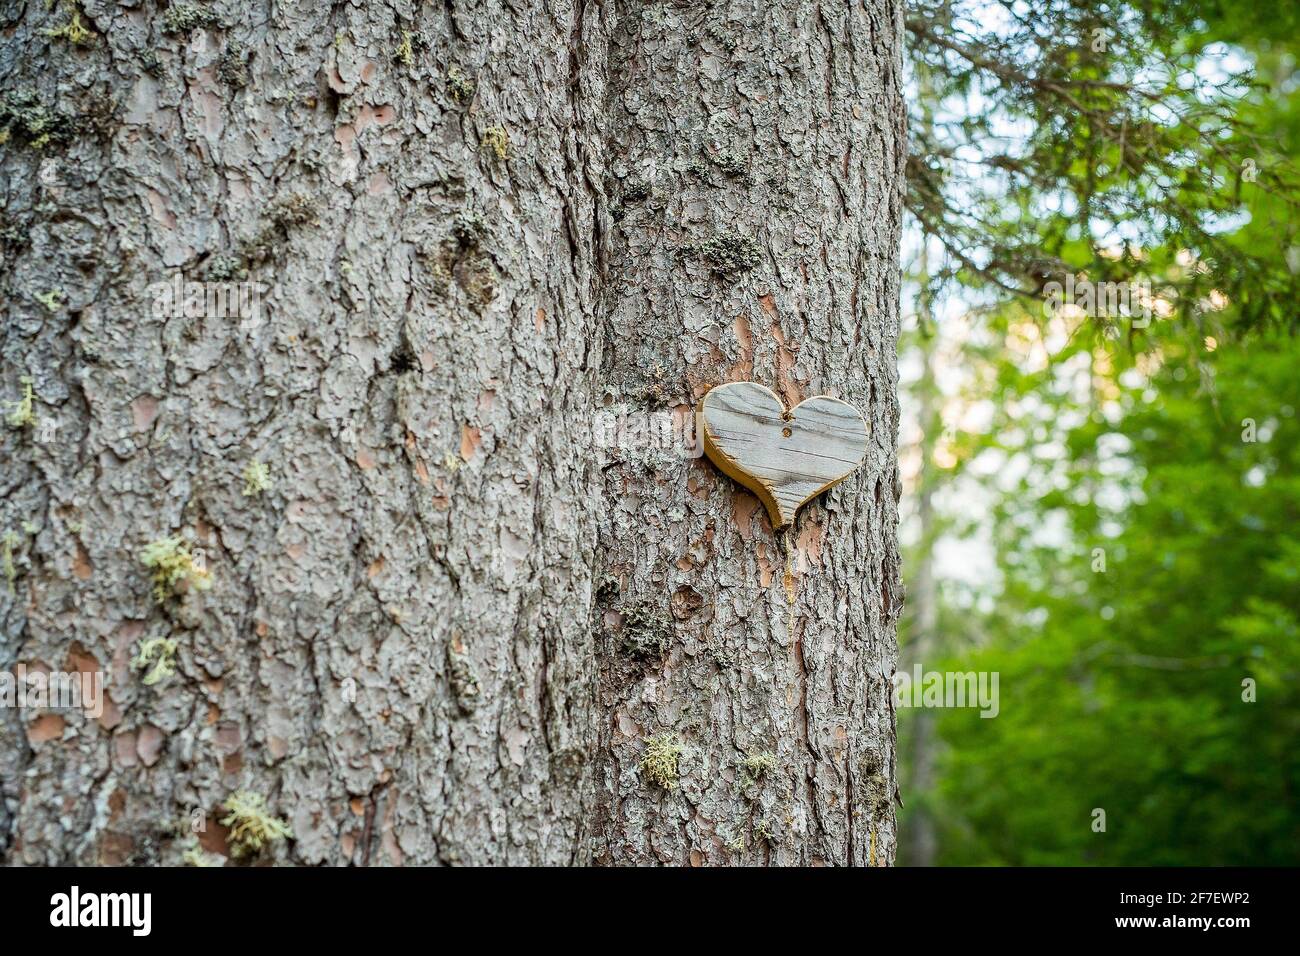 Bark of a tree in a forest with a small wooden heart on the tree trunk. Concept of love for the trees and outdoor. Stock Photo